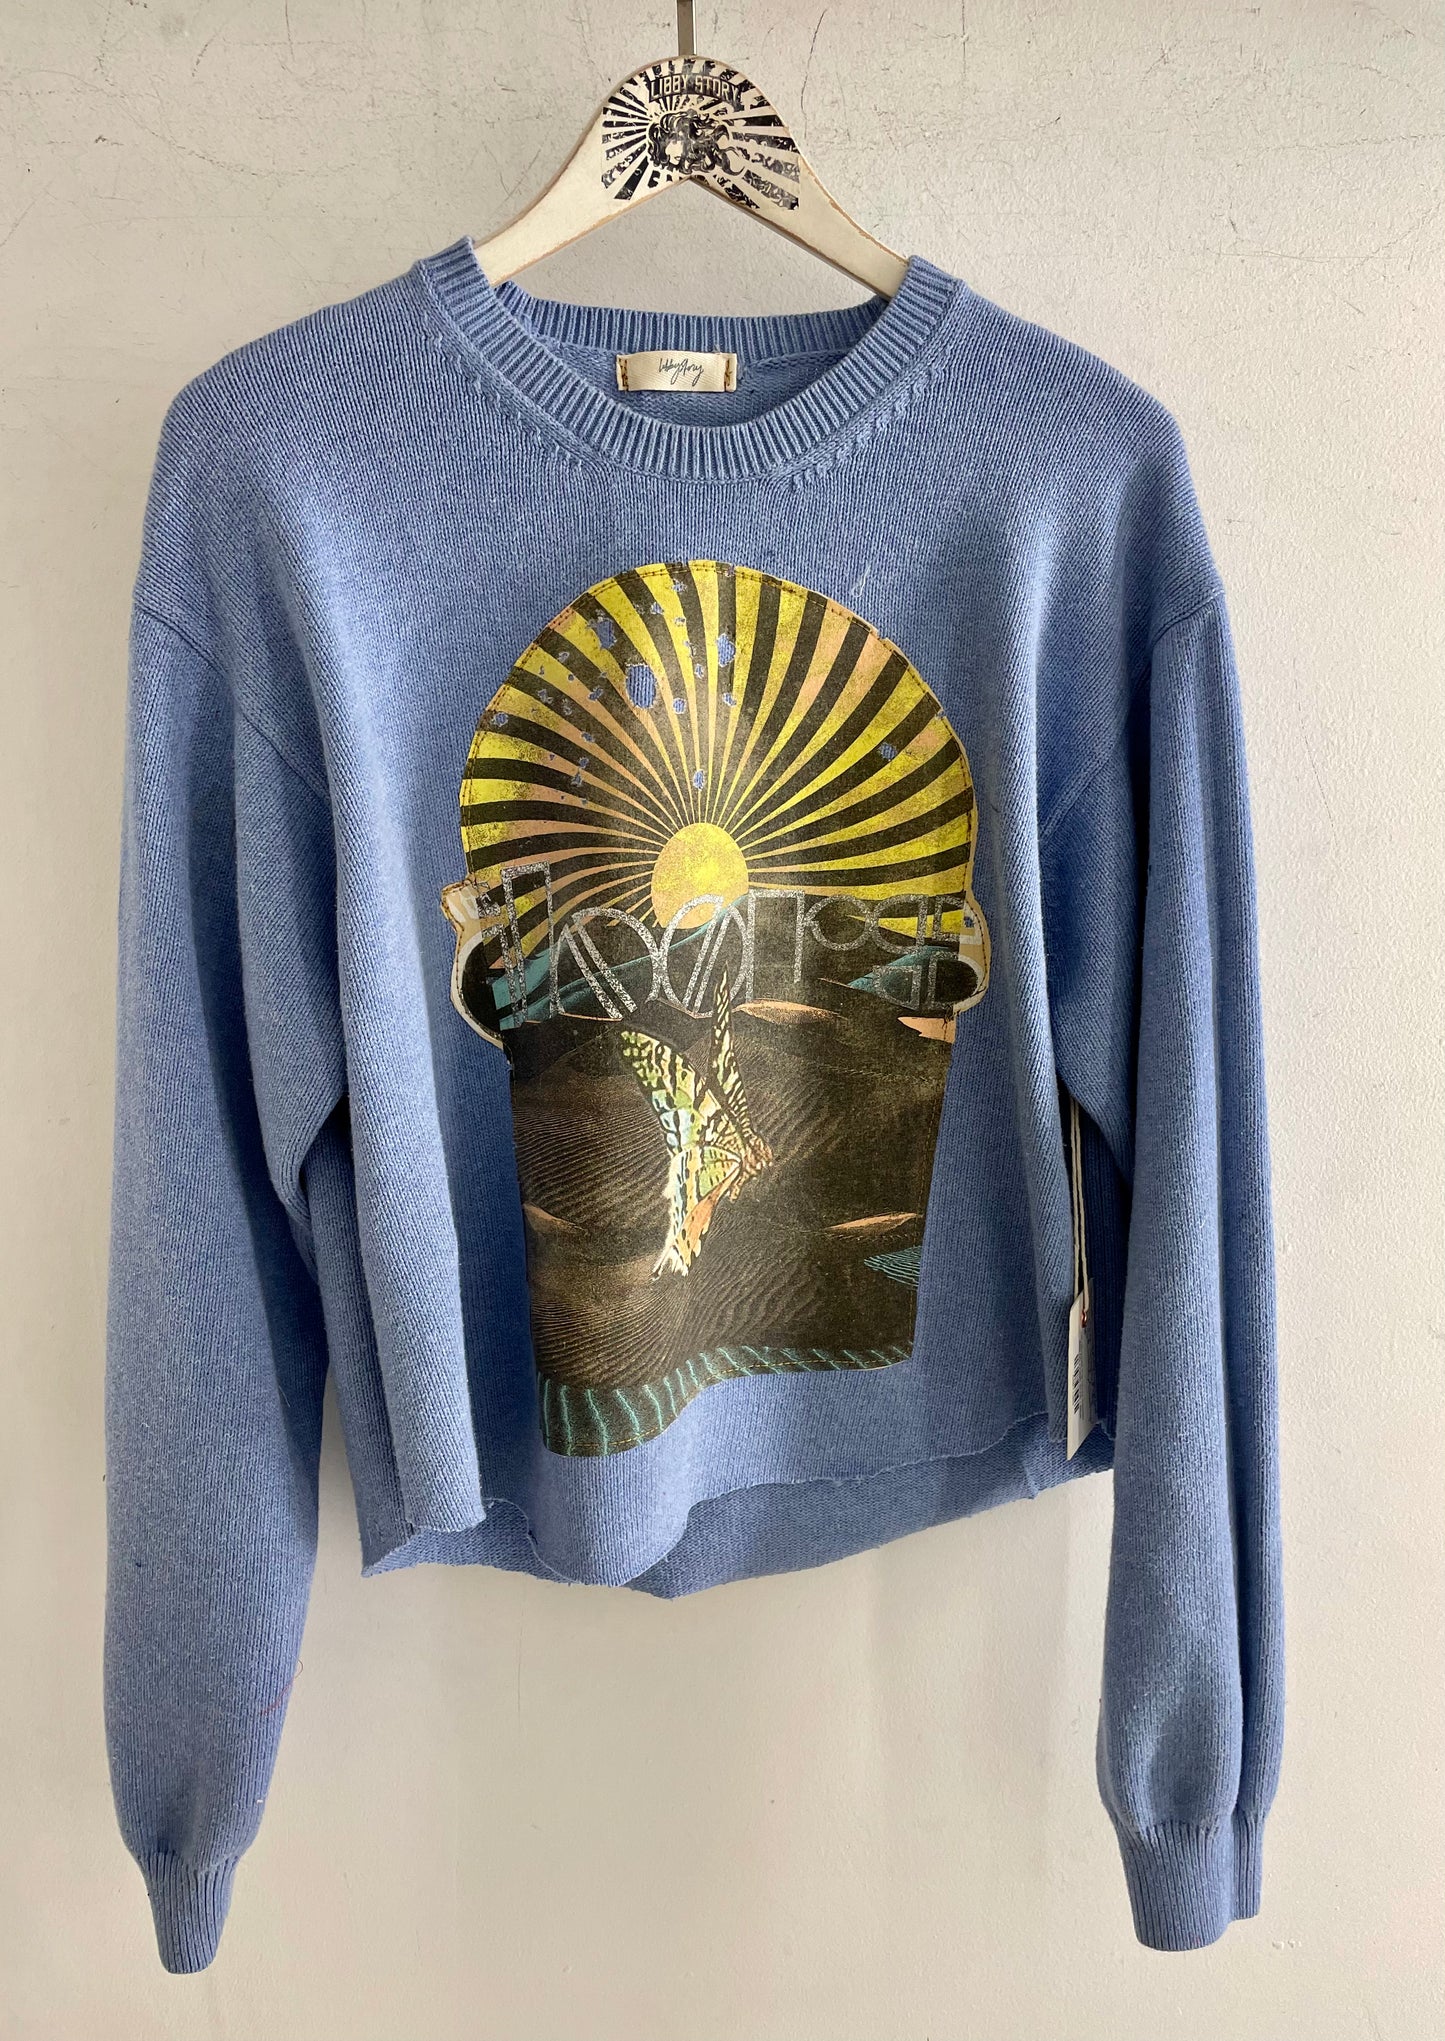 LS Upcycled The Doors Sweater